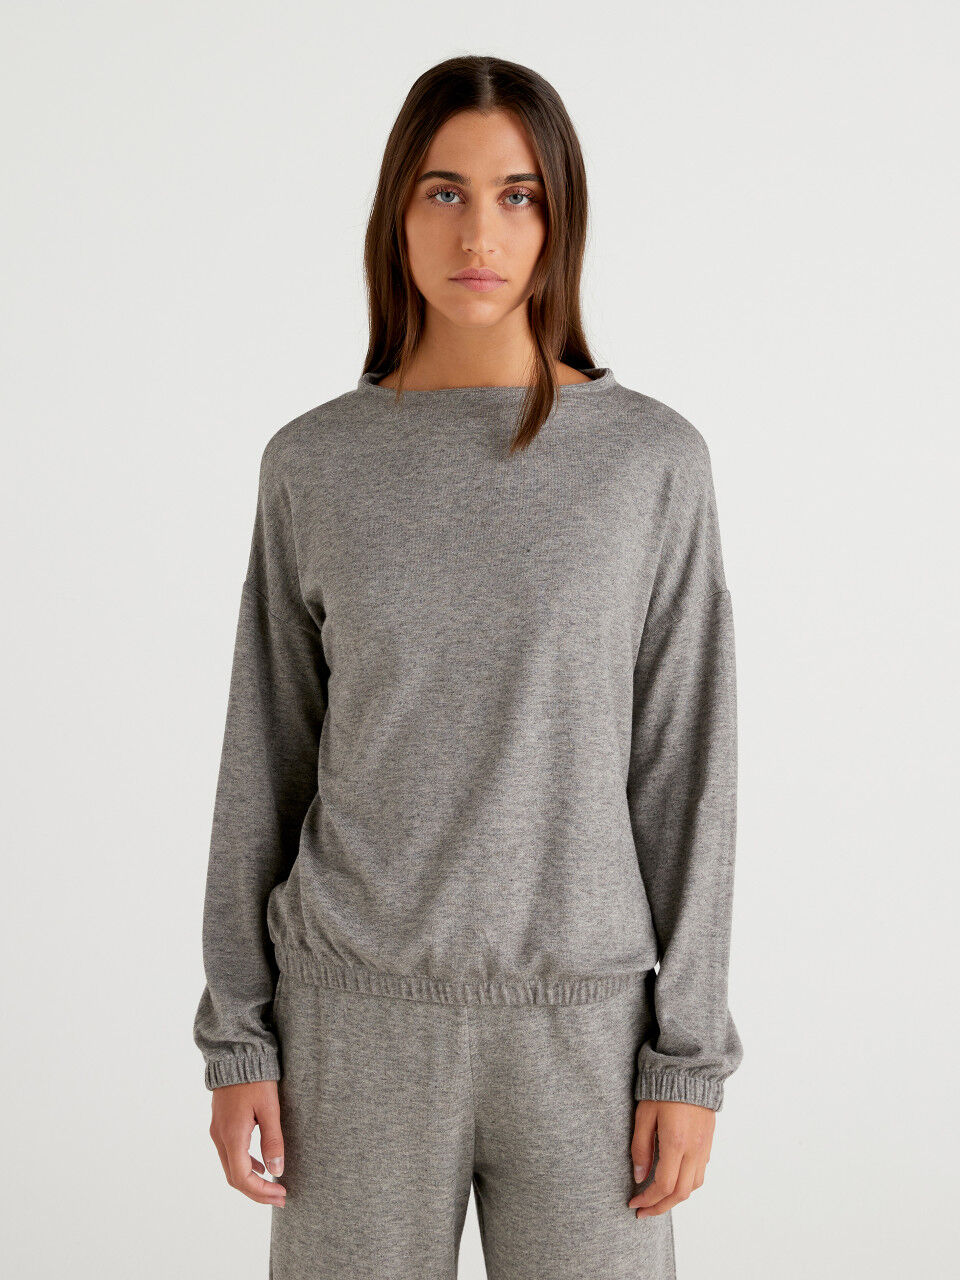 Marl sweater with turtleneck